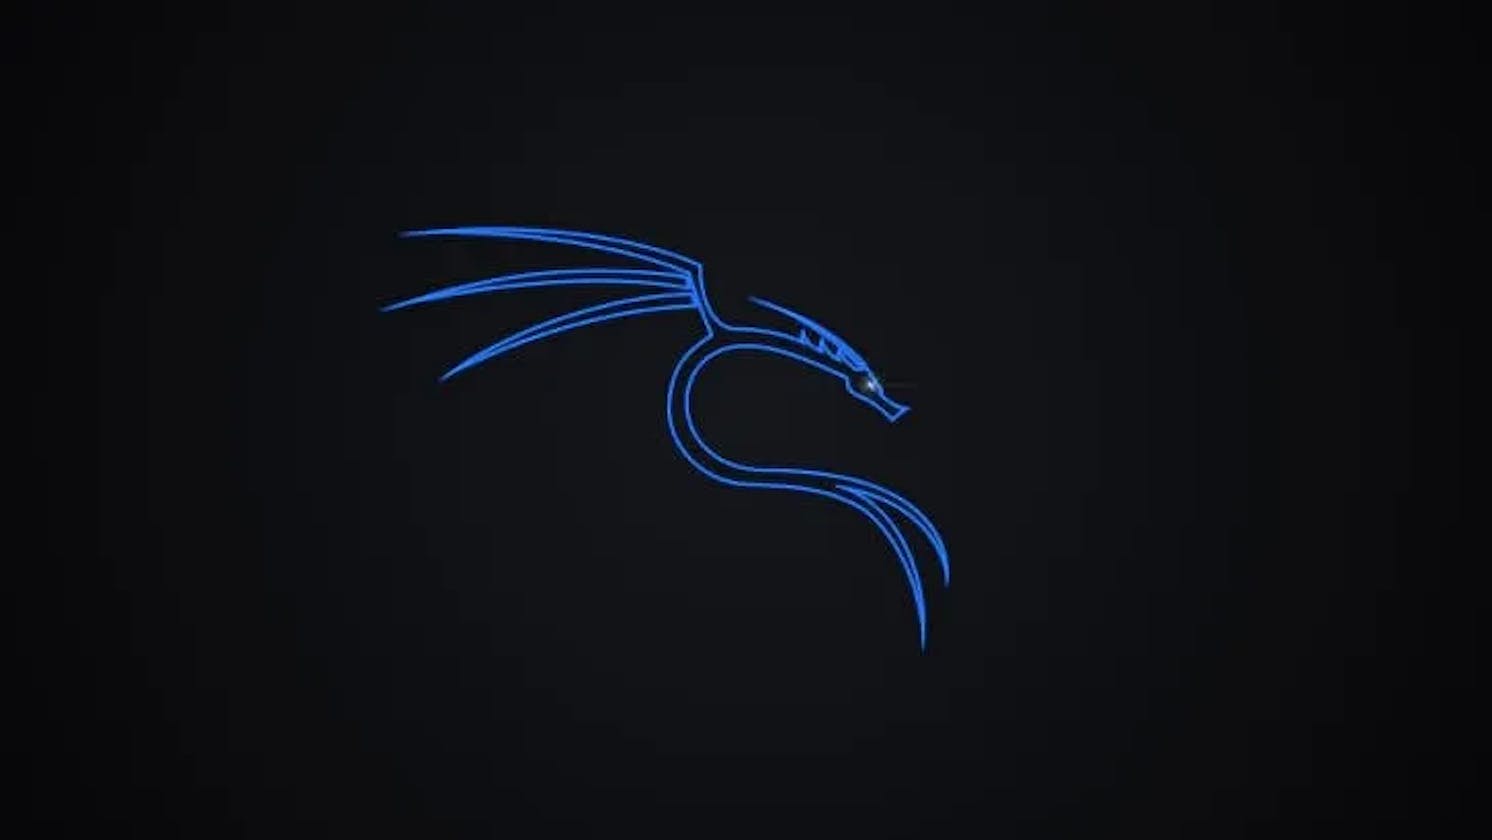 How to Install Browser-Based Kali Linux with 2500+ security apps From Azure Marketplace